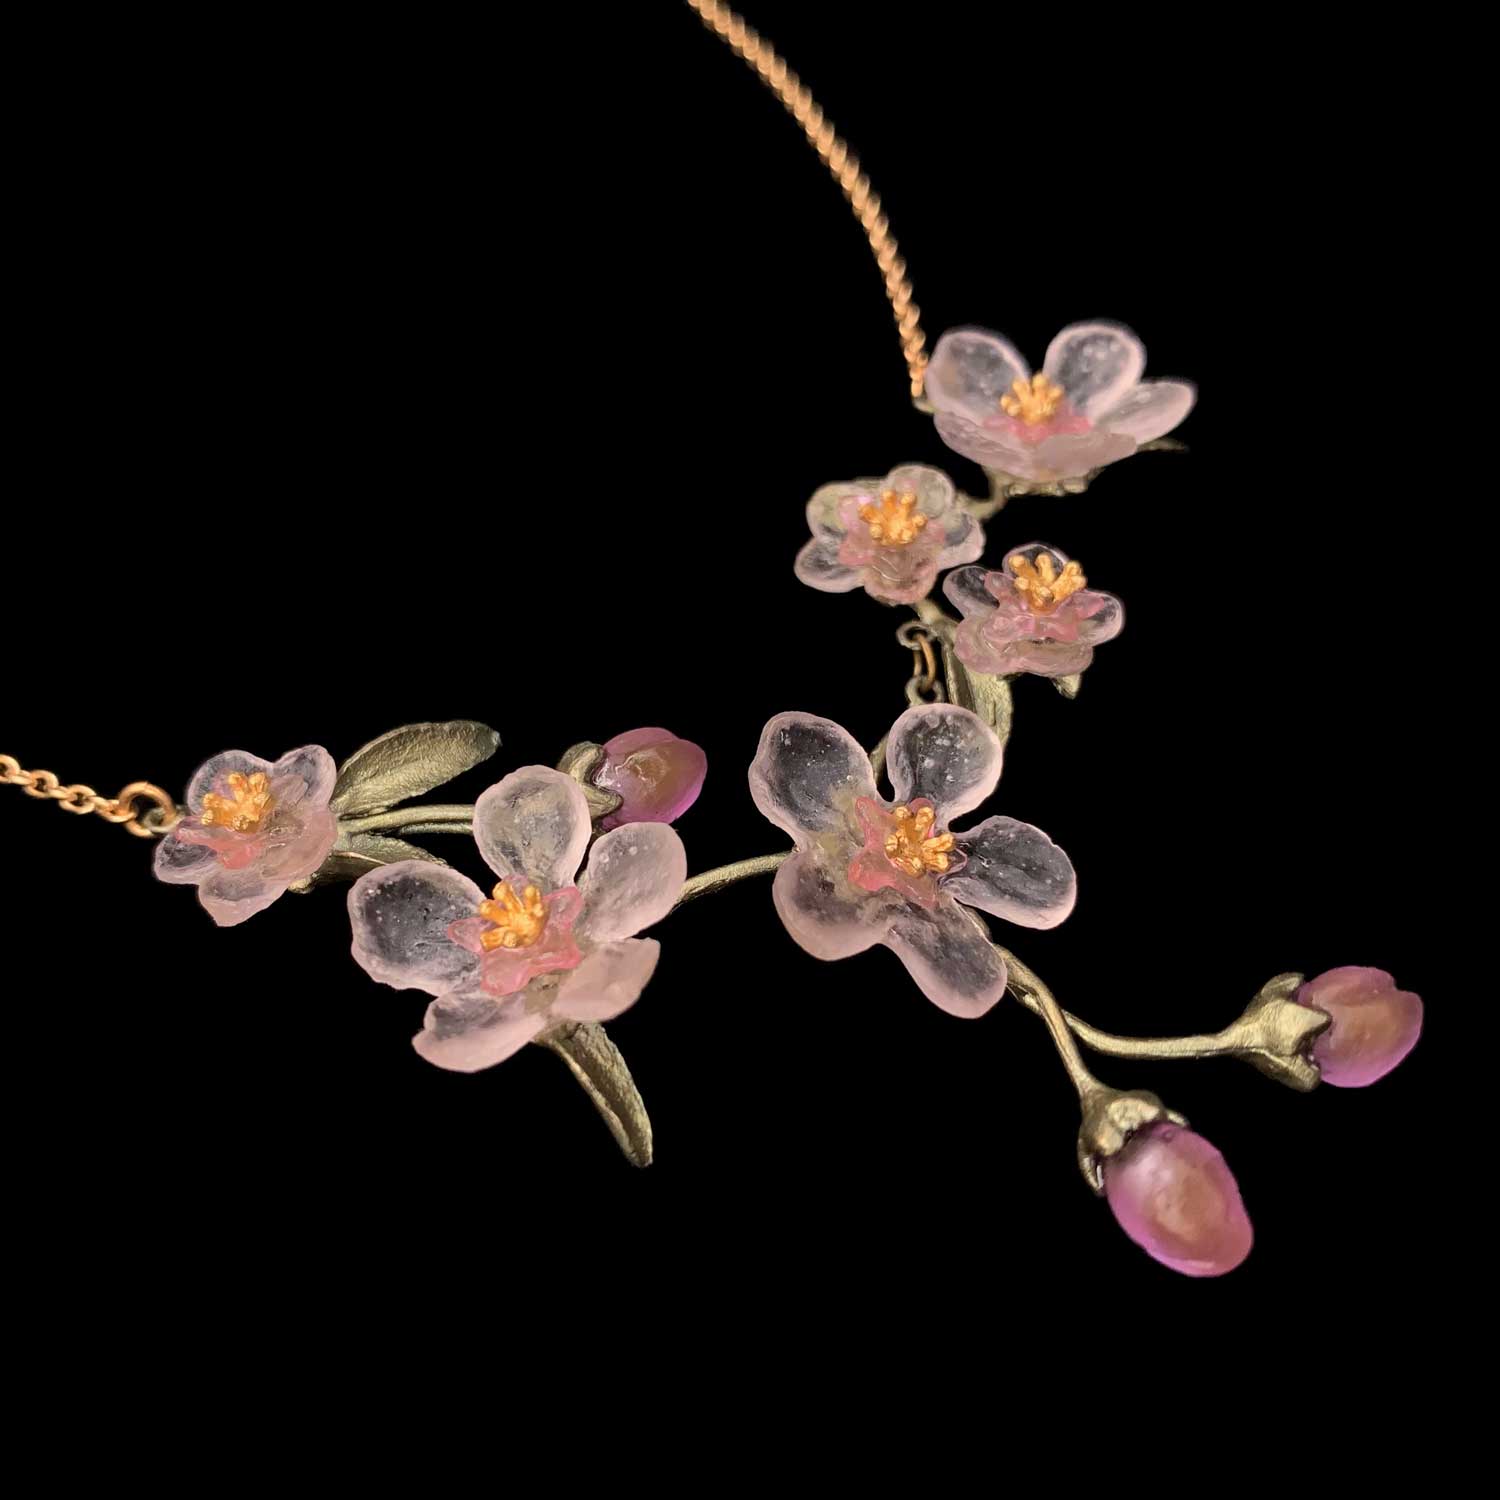 Peach Blossom Necklace - Statement